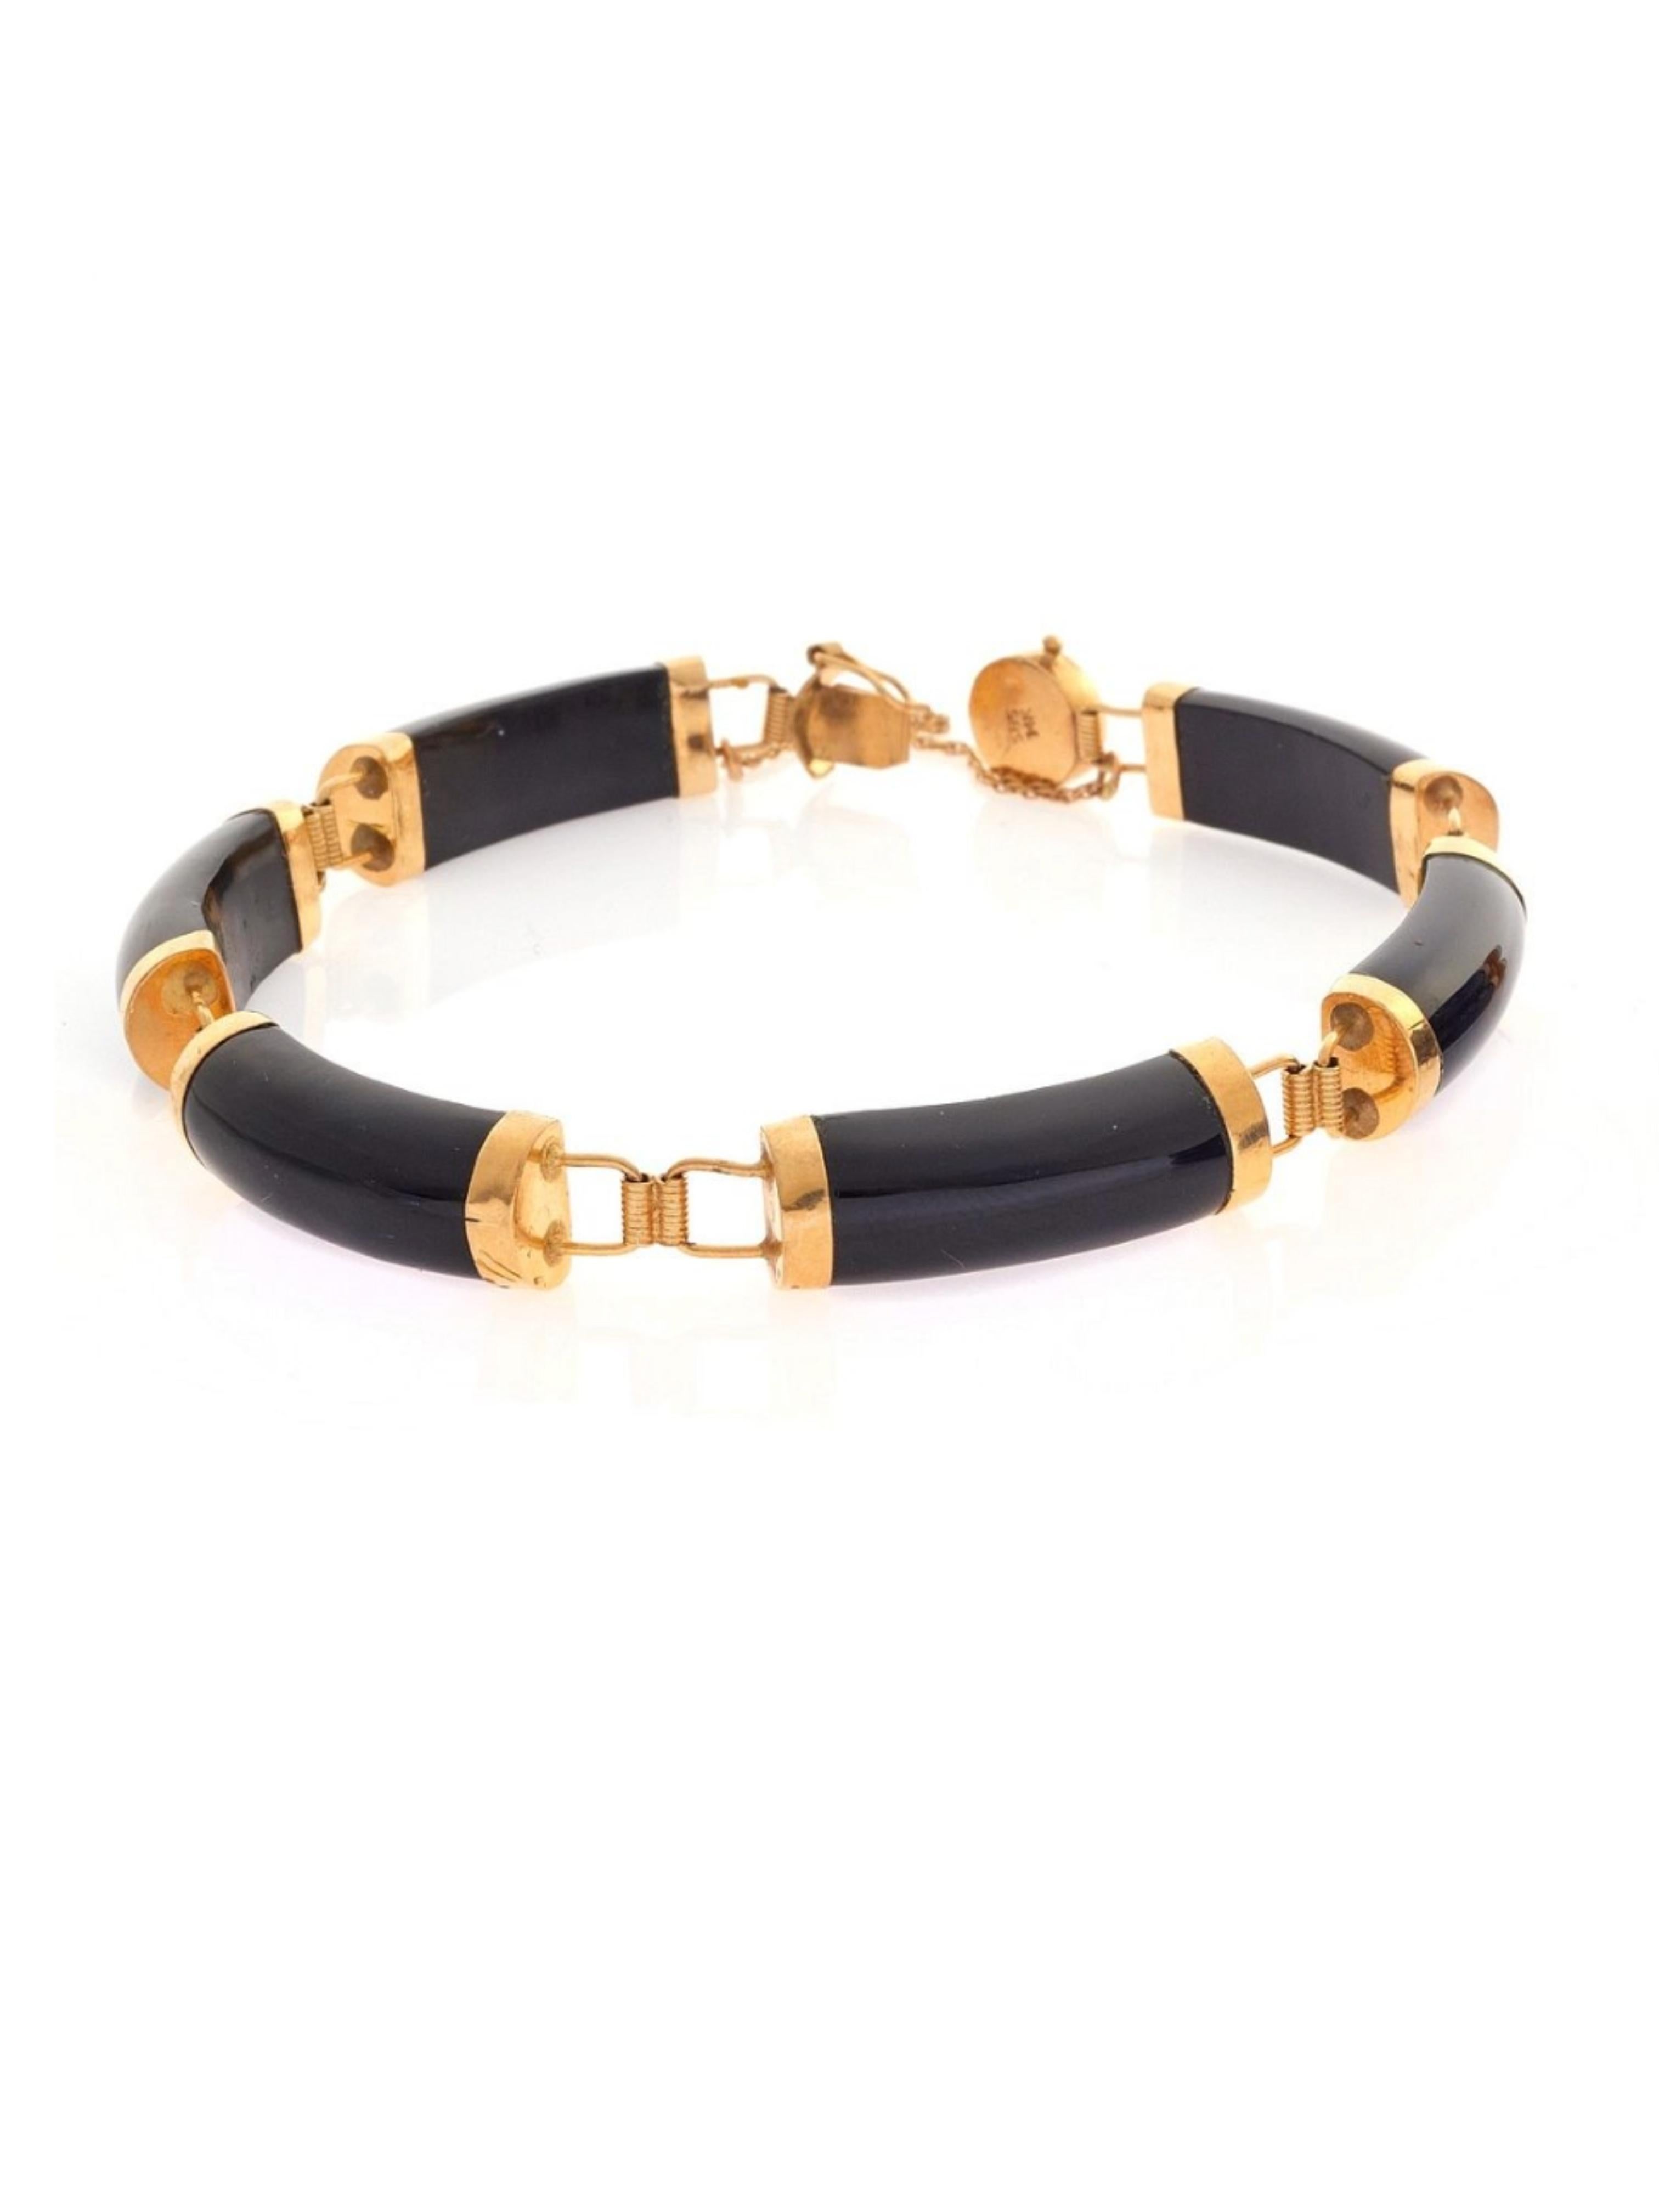 Elevate your style with a touch of good fortune. This bracelet features a round box clasp adorned with the Chinese character for good luck, surrounded by a row of rectangular black onyx segments. The curved onyx stones are topped with 14kt yellow